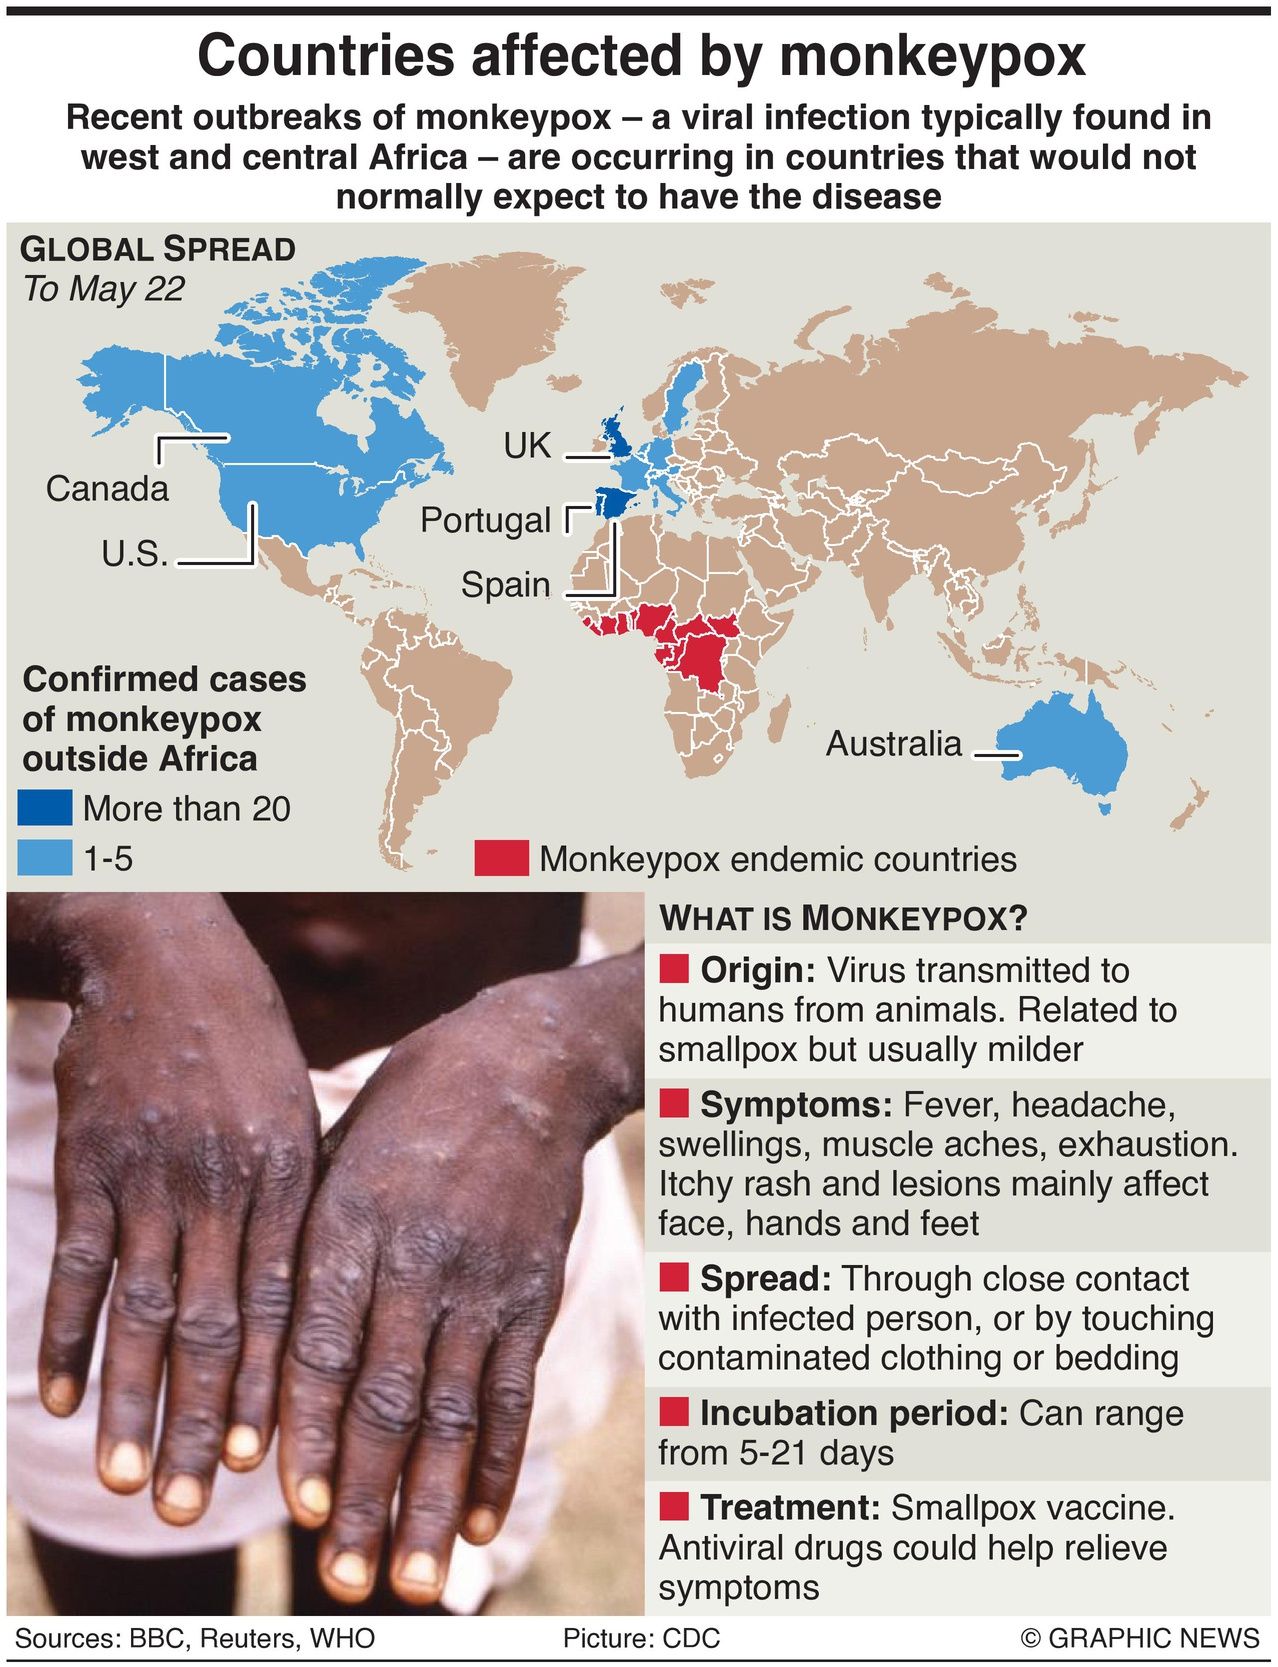 Which countries are currently affected by Monkey Pox - Infographic provided by graphic news